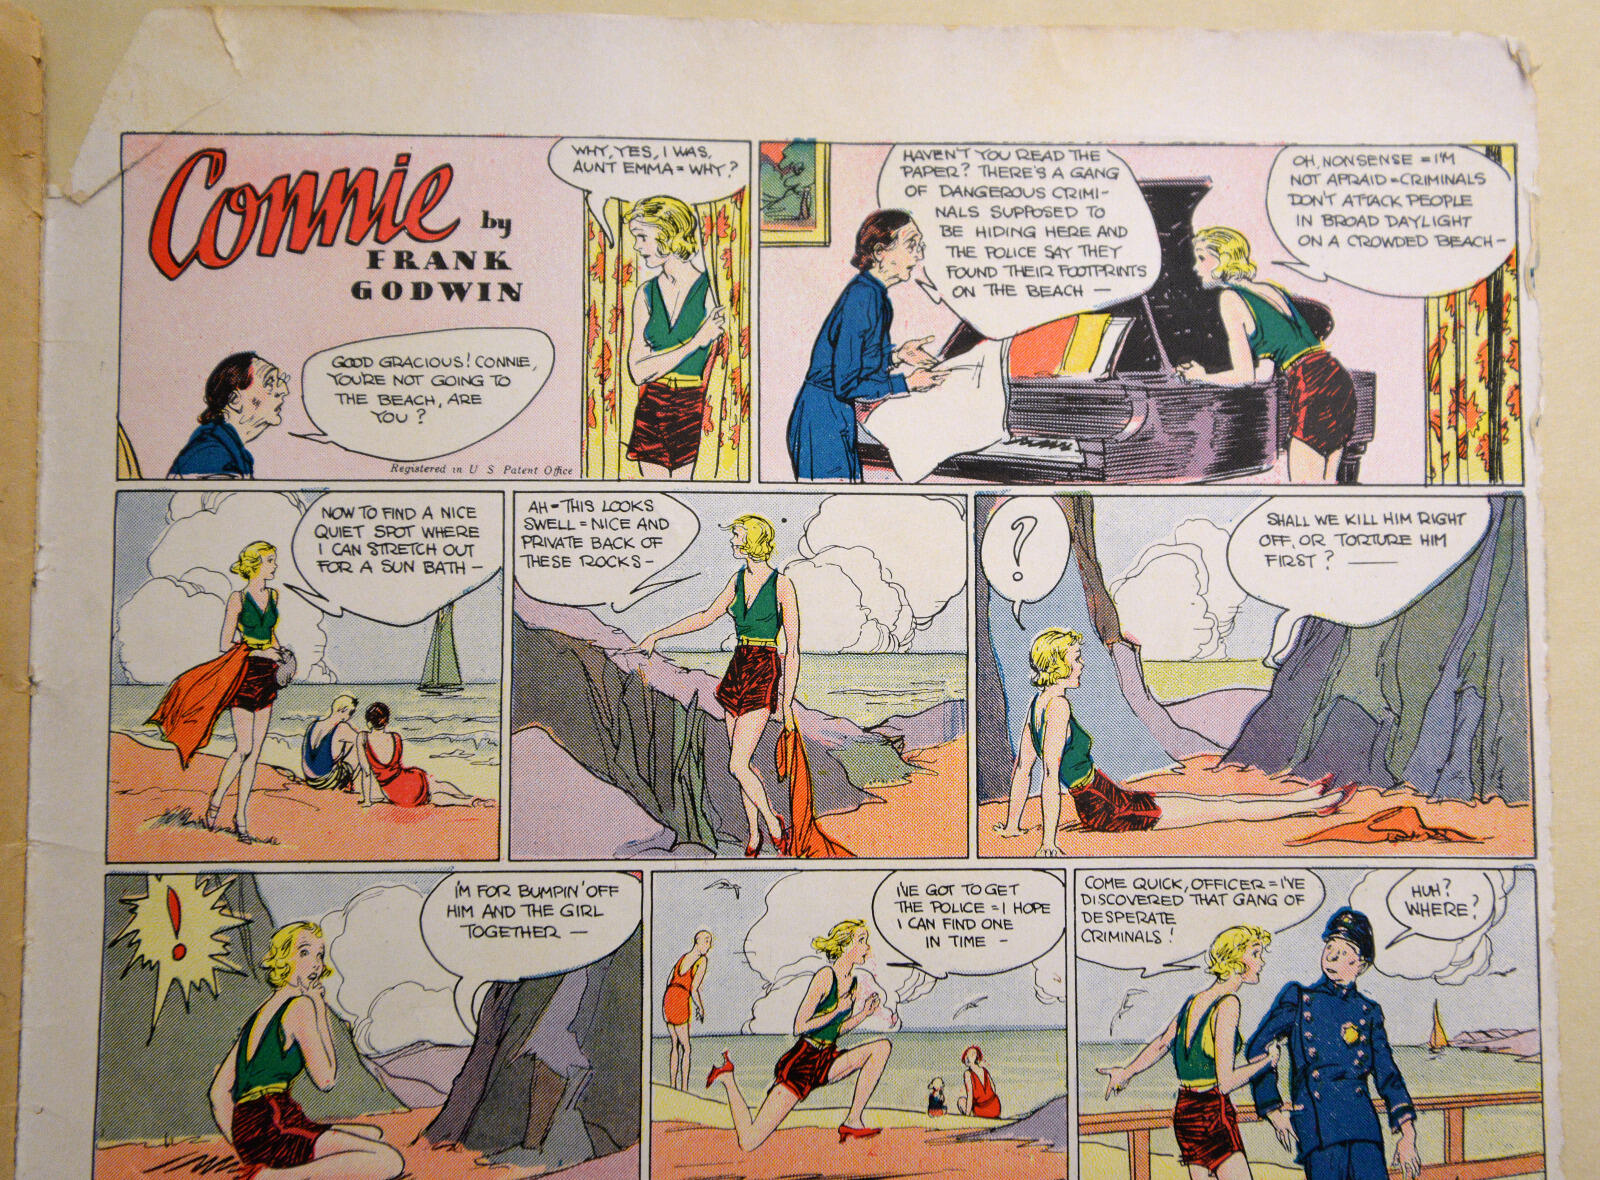 Printed in 1933, “Famous Funnies: A Carnival of Comics" was filled with reprints of newspaper comic strips. It was the first precursor to "Famous Funnies," which is considered to be the first regularly published American comic book.